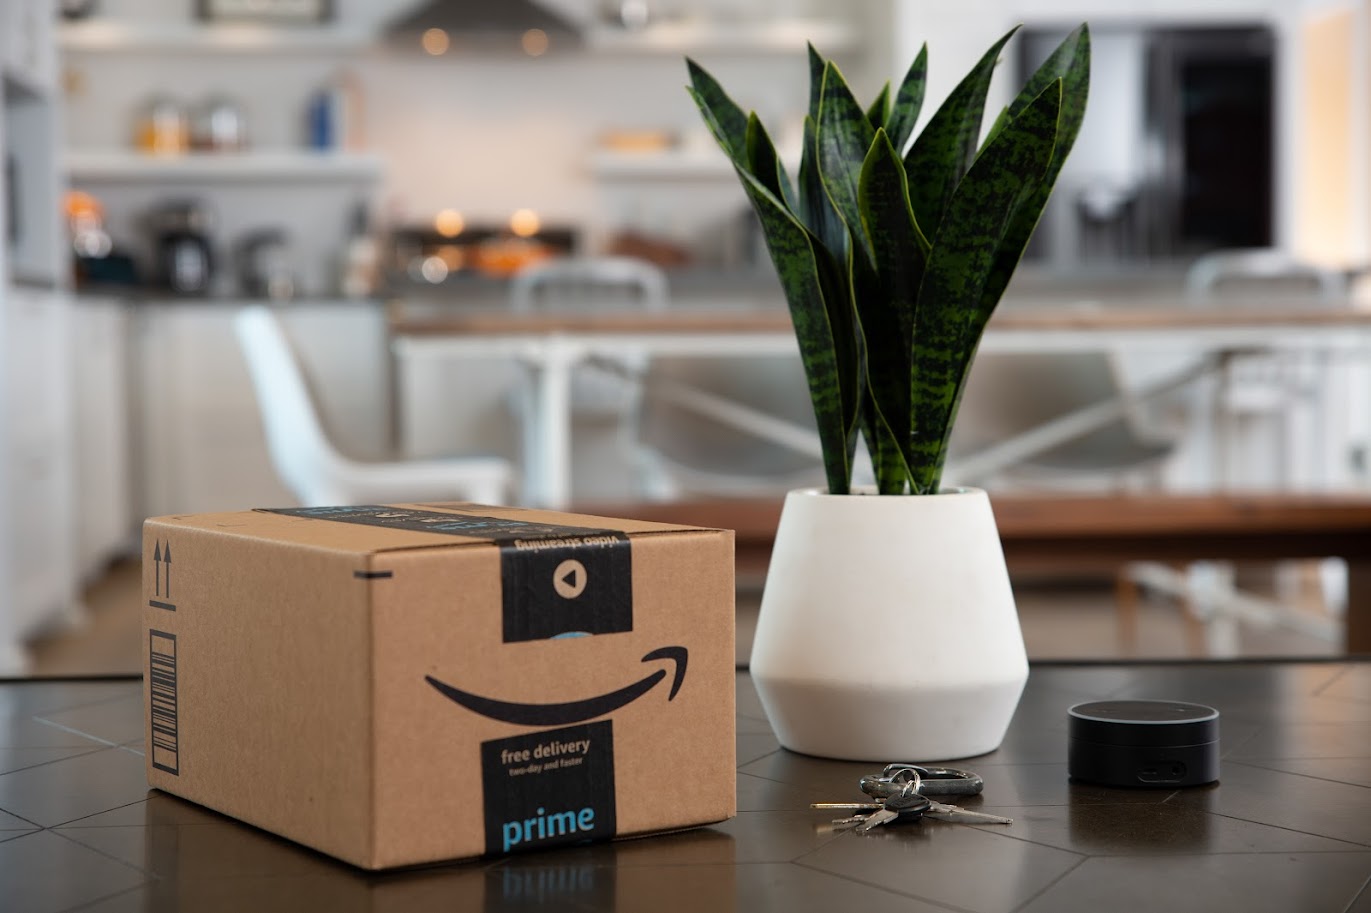 Amazon replaces single-use plastic delivery bags and envelopes with paper